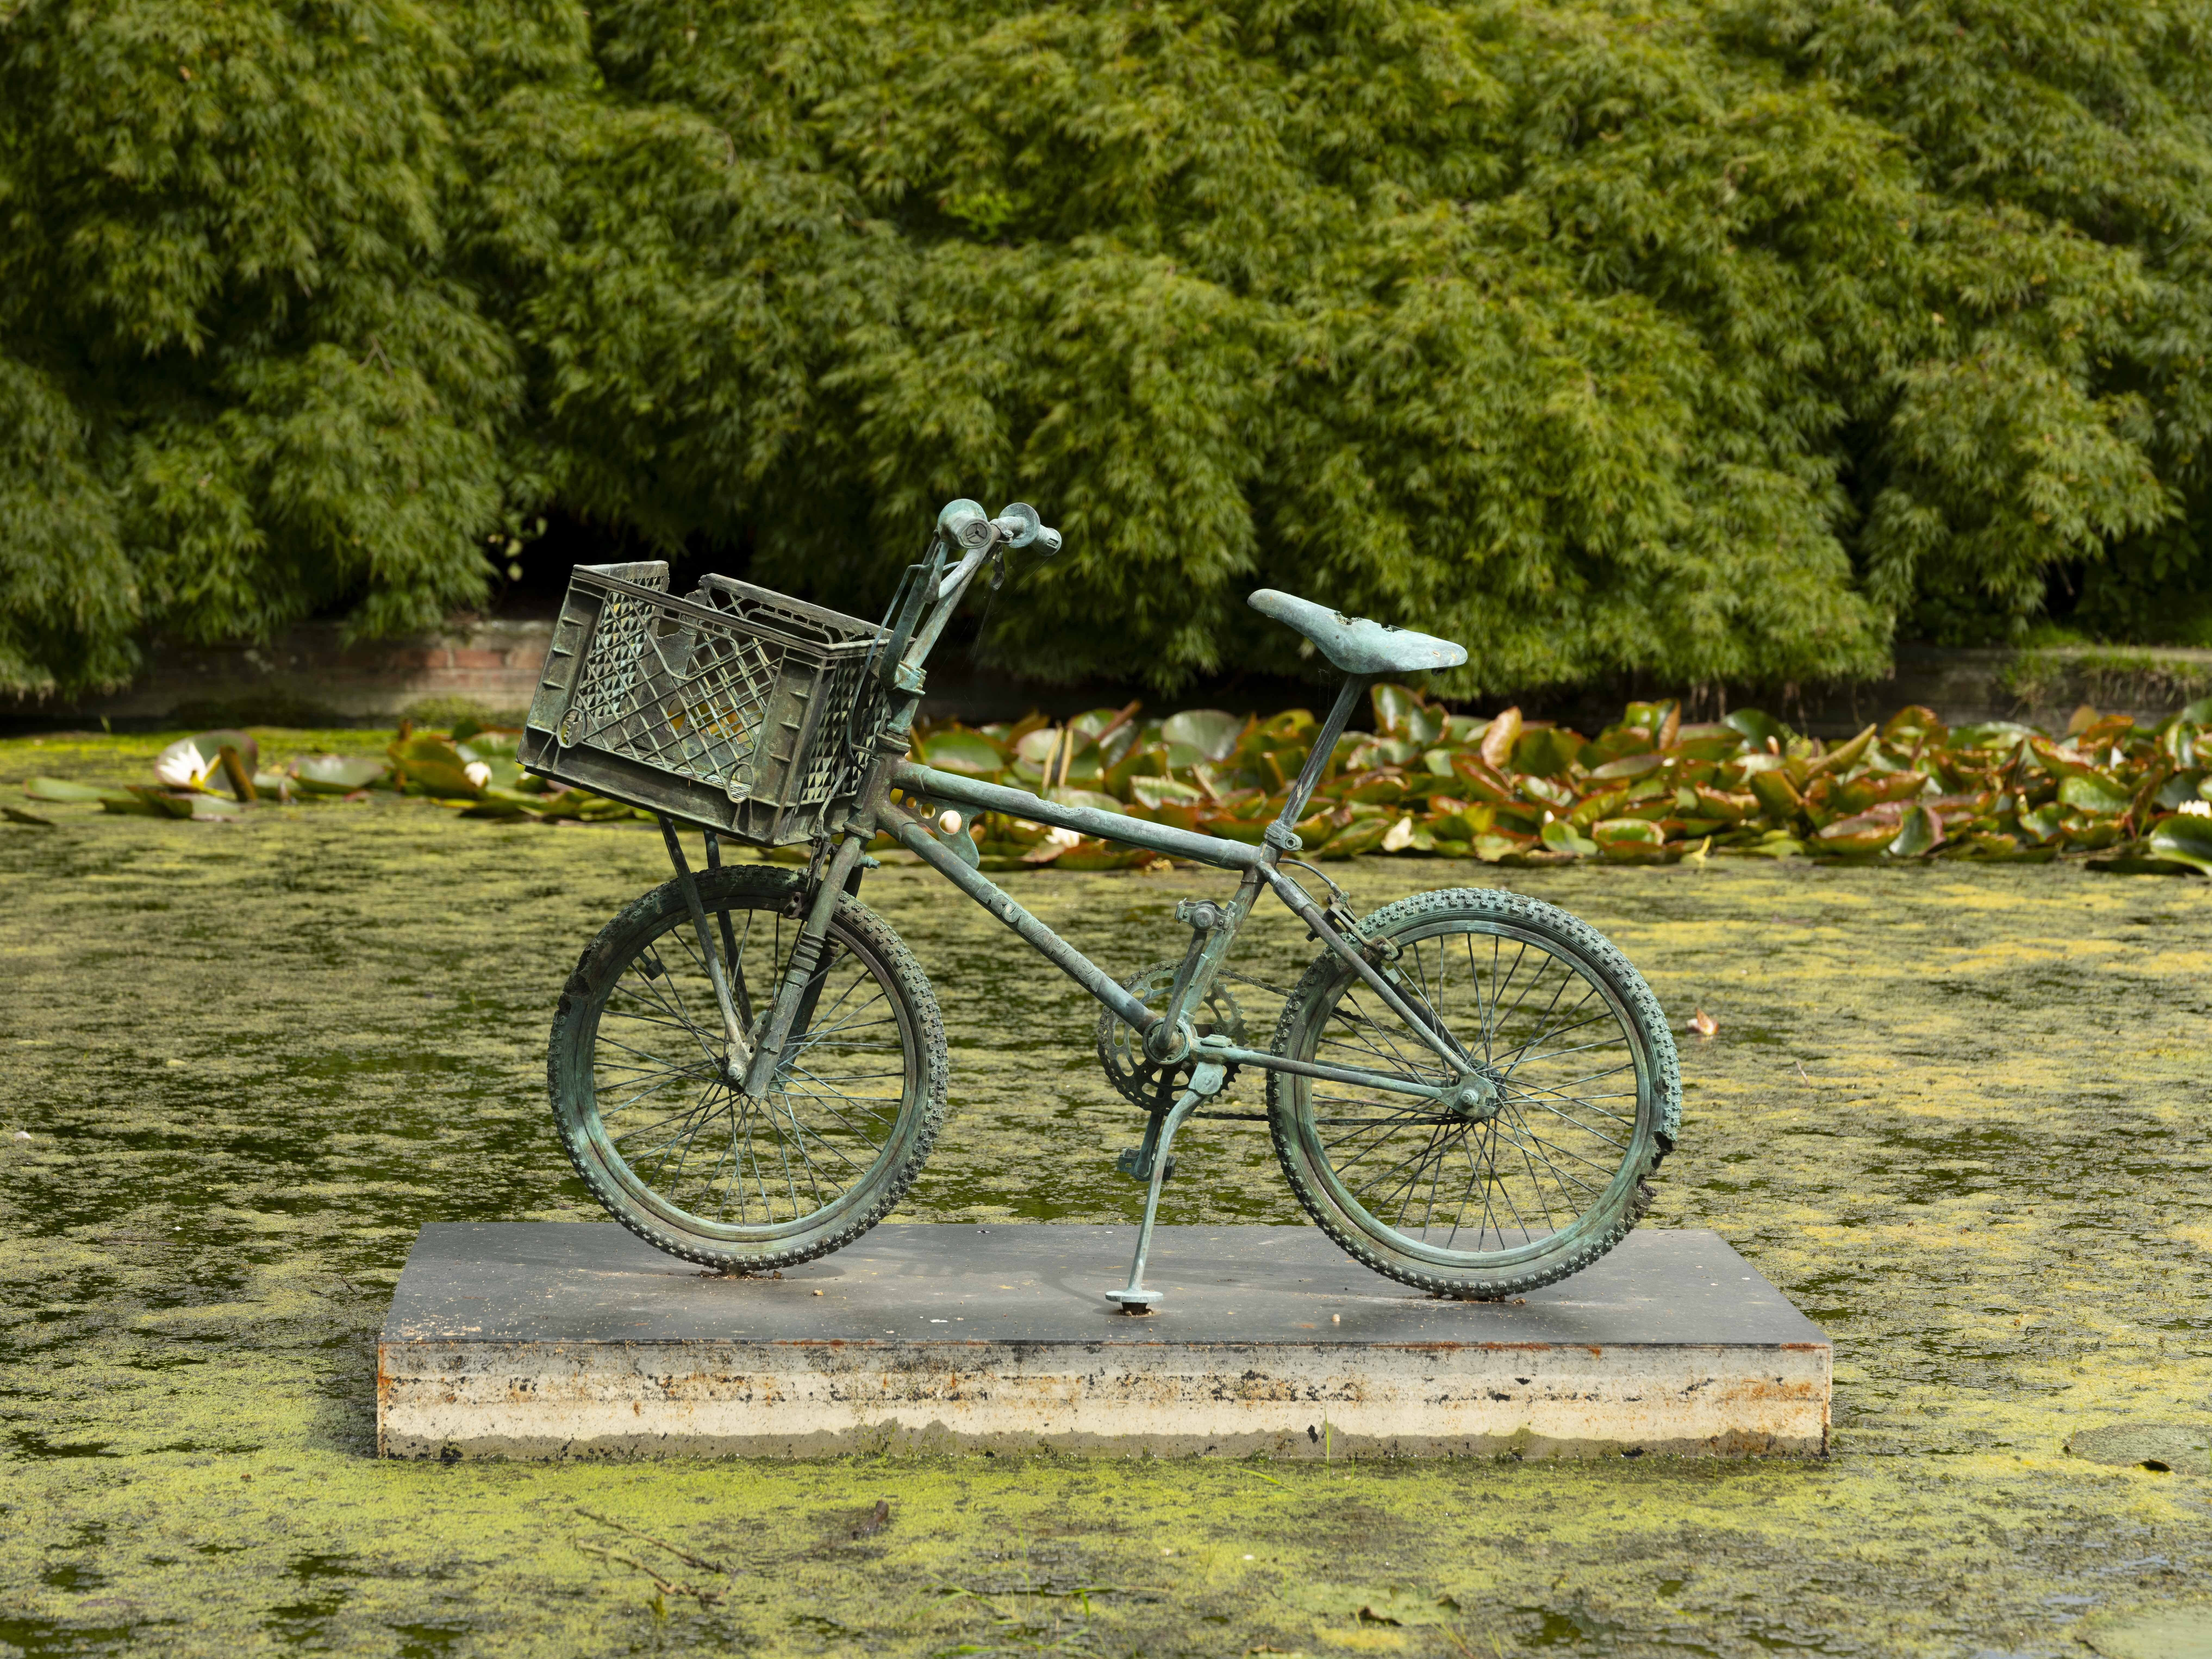 A bronze bicycle mounted on a plinth in the centre of a pond, with bushes and trees in the background.